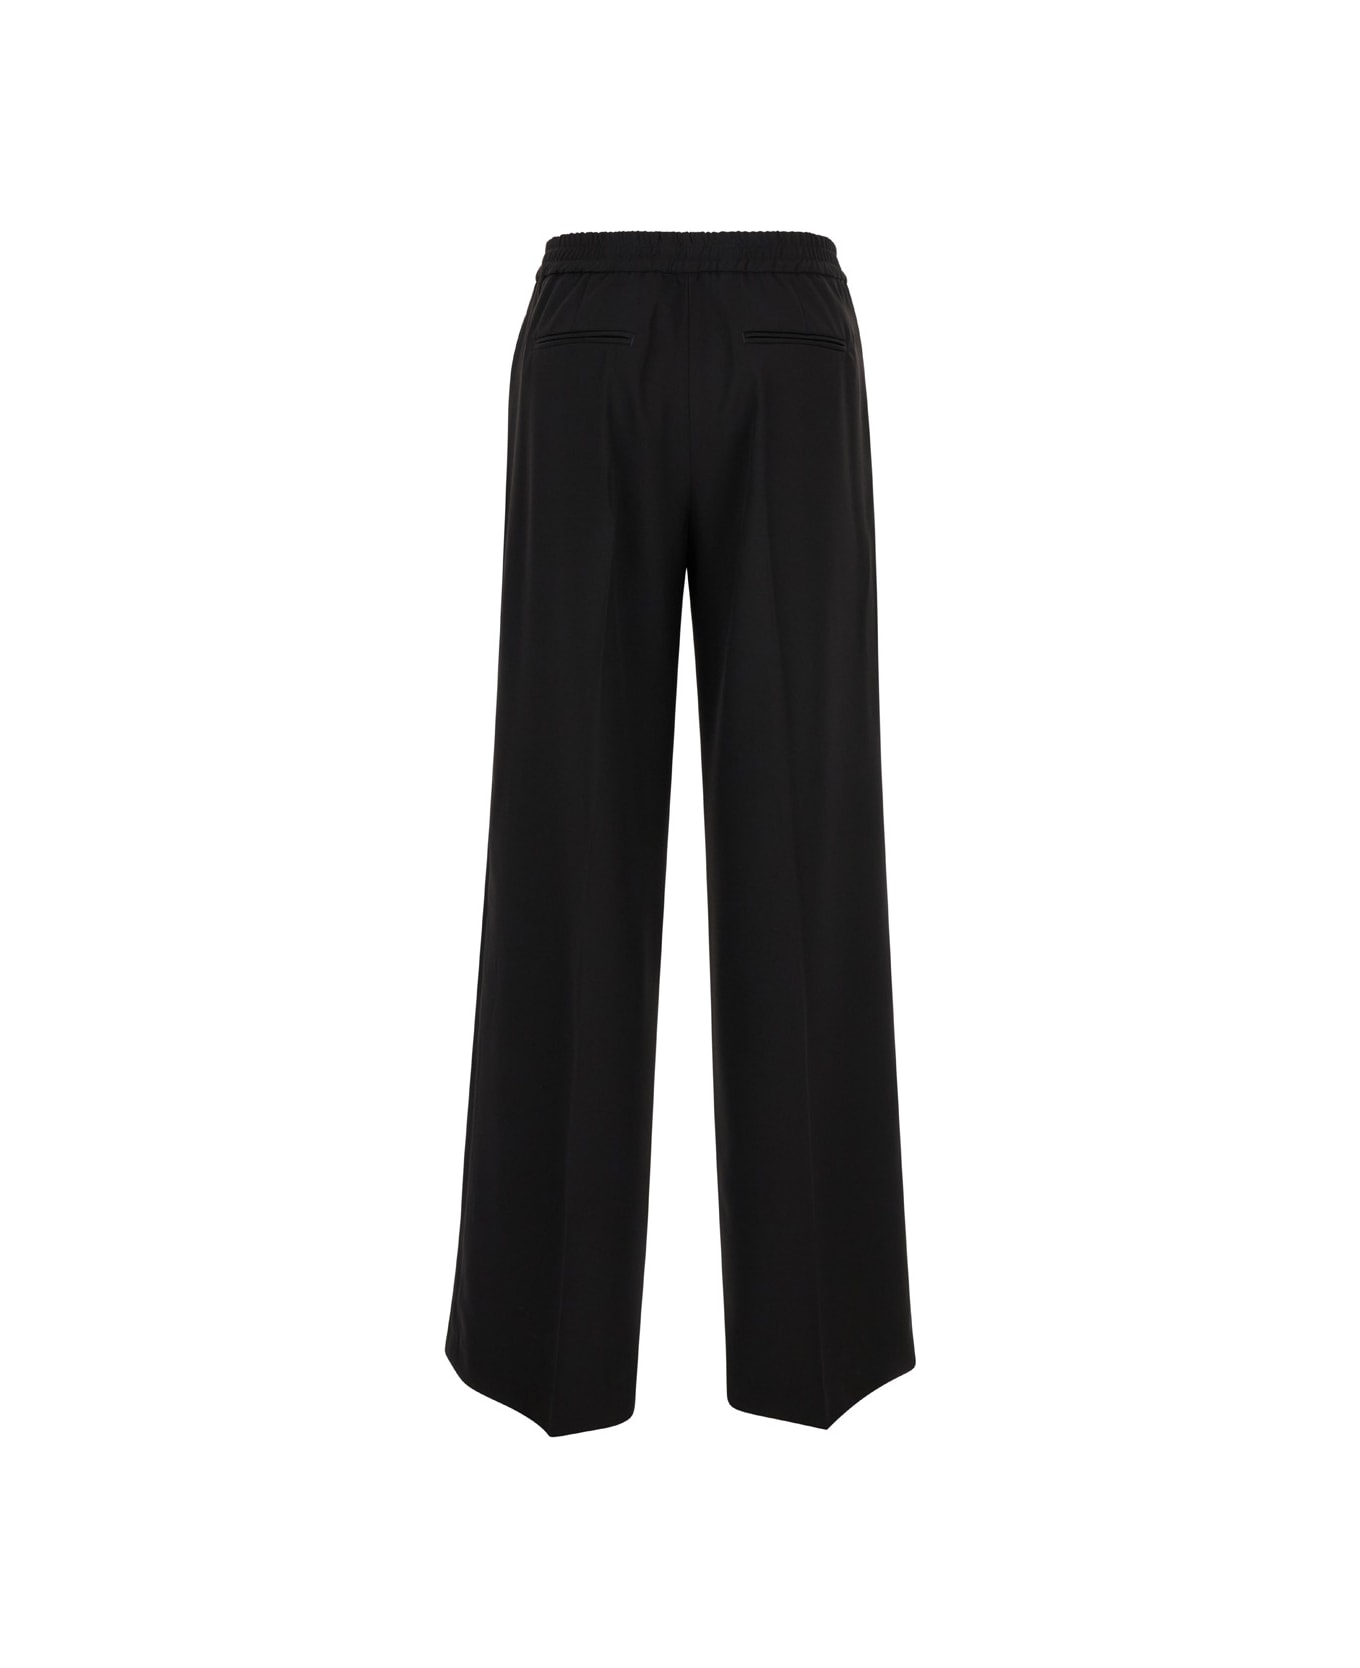 PT Torino Tailored 'lorenza' High Waisted Black Trousers In Technical Fabric Woman - Black